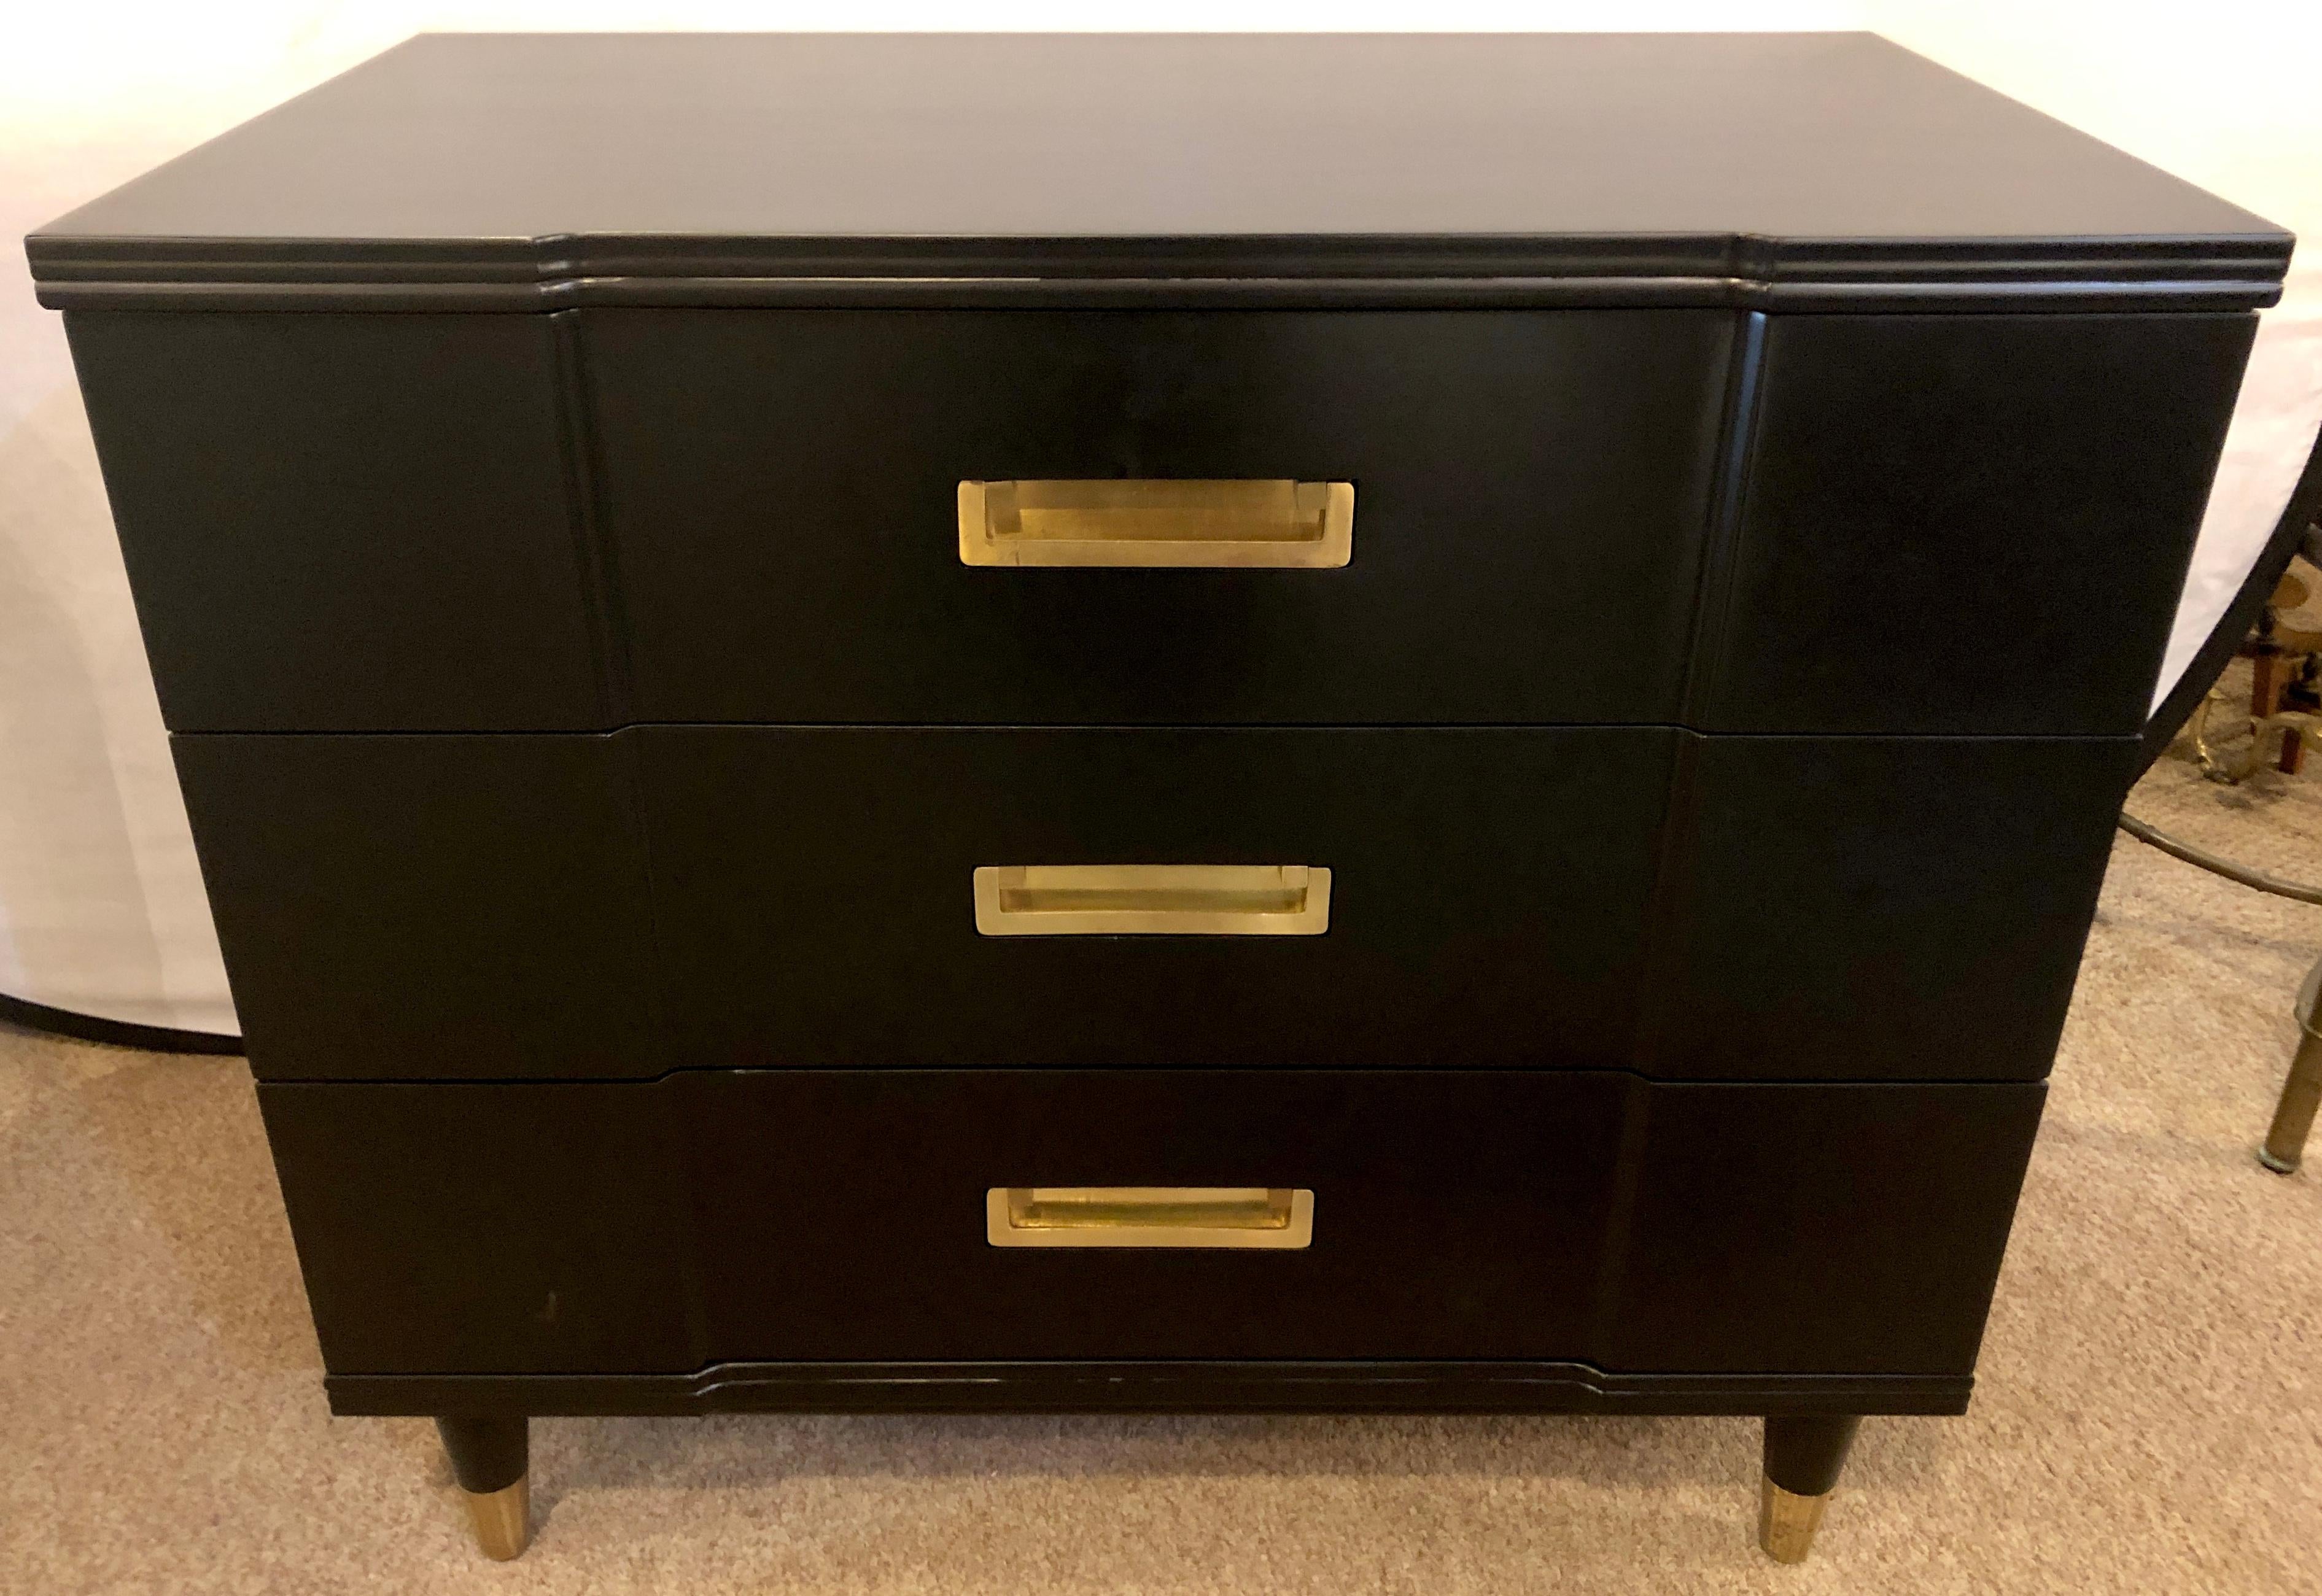 Hollywood Regency Mid-Century Modern Ebony Widdicomb Campaign Chests Commodes or Nightstands, Pair